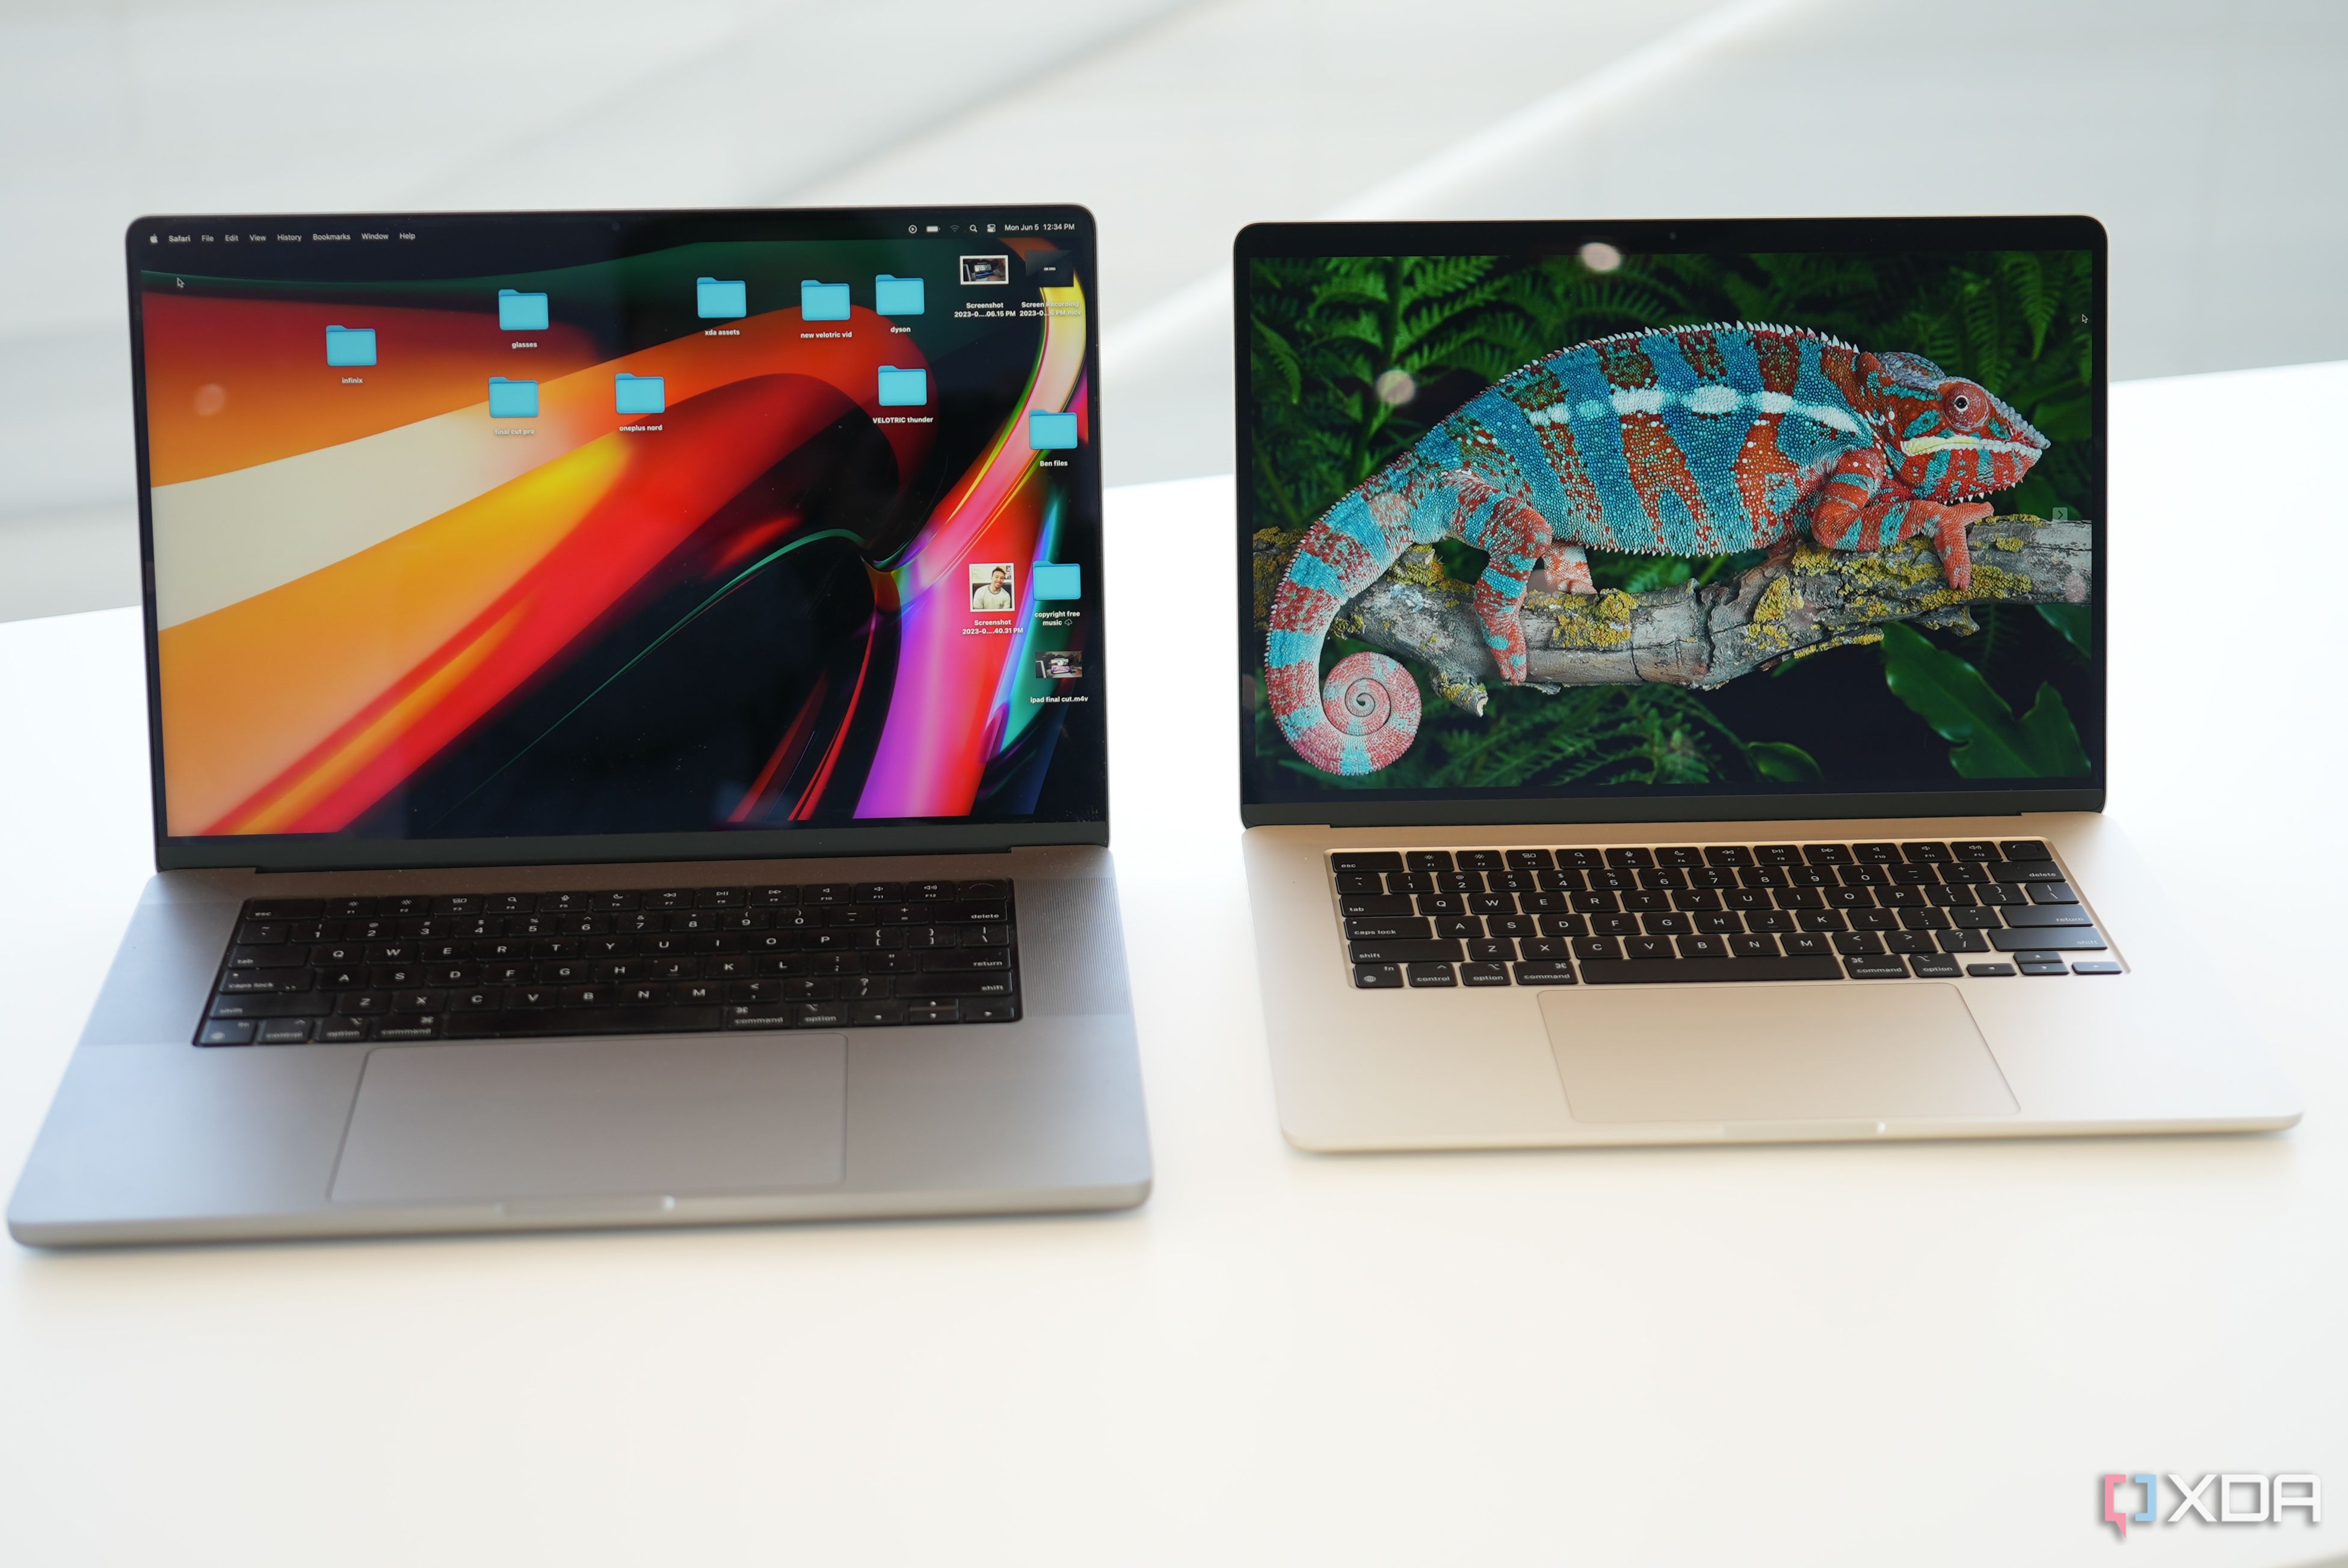 MacBook Air and MacBook Pro: What's the difference?